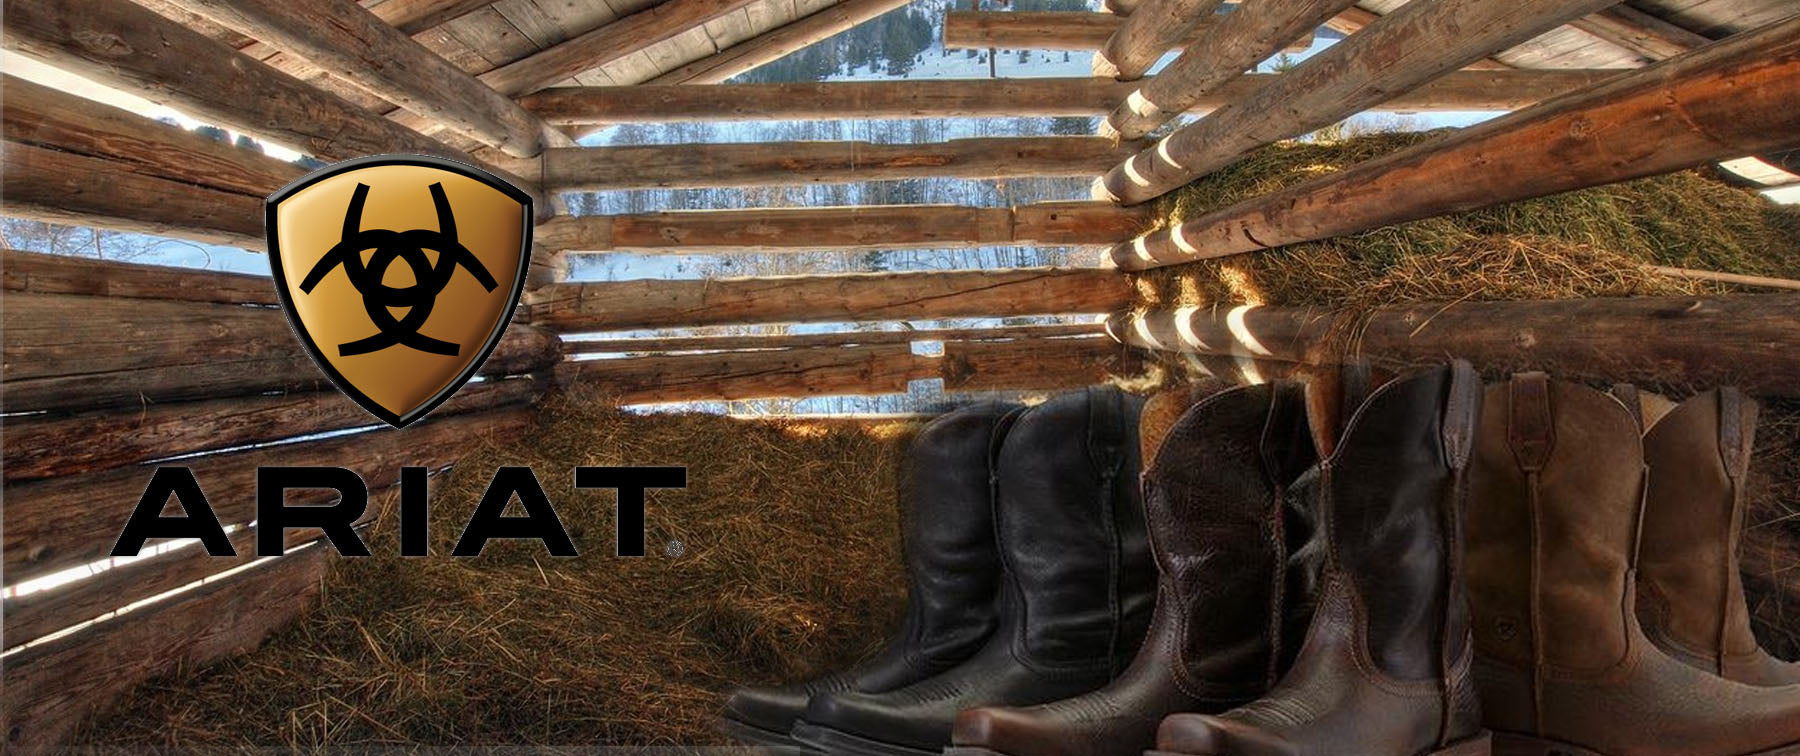 Buy Ariat Boots Online  Ariat Store Online  Tagged Ariat  Page 4